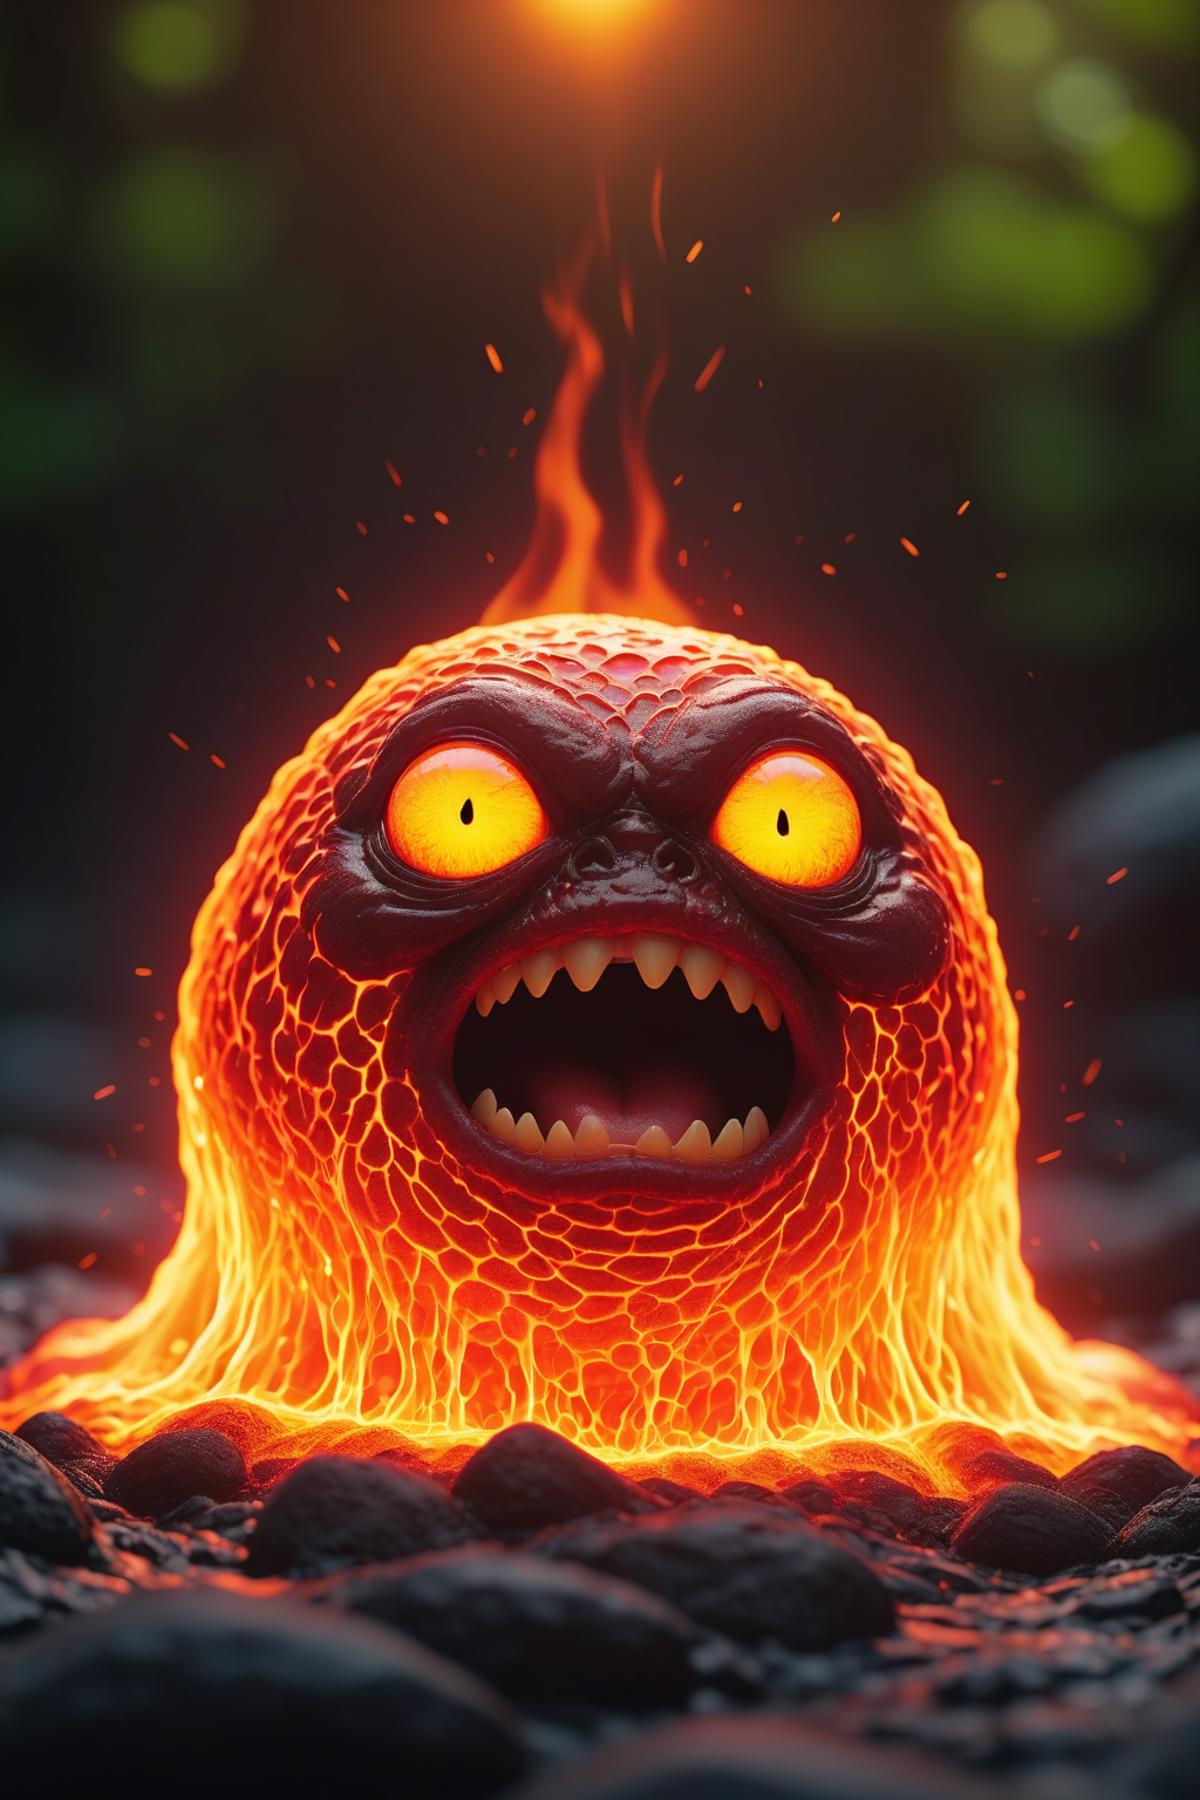 A red, fire-breathing creature with yellow eyes and fangs is displayed in the image. The creature is surrounded by flames, giving it a fiery appearance. It is situated in a lava-filled environment, with a rock in the background.